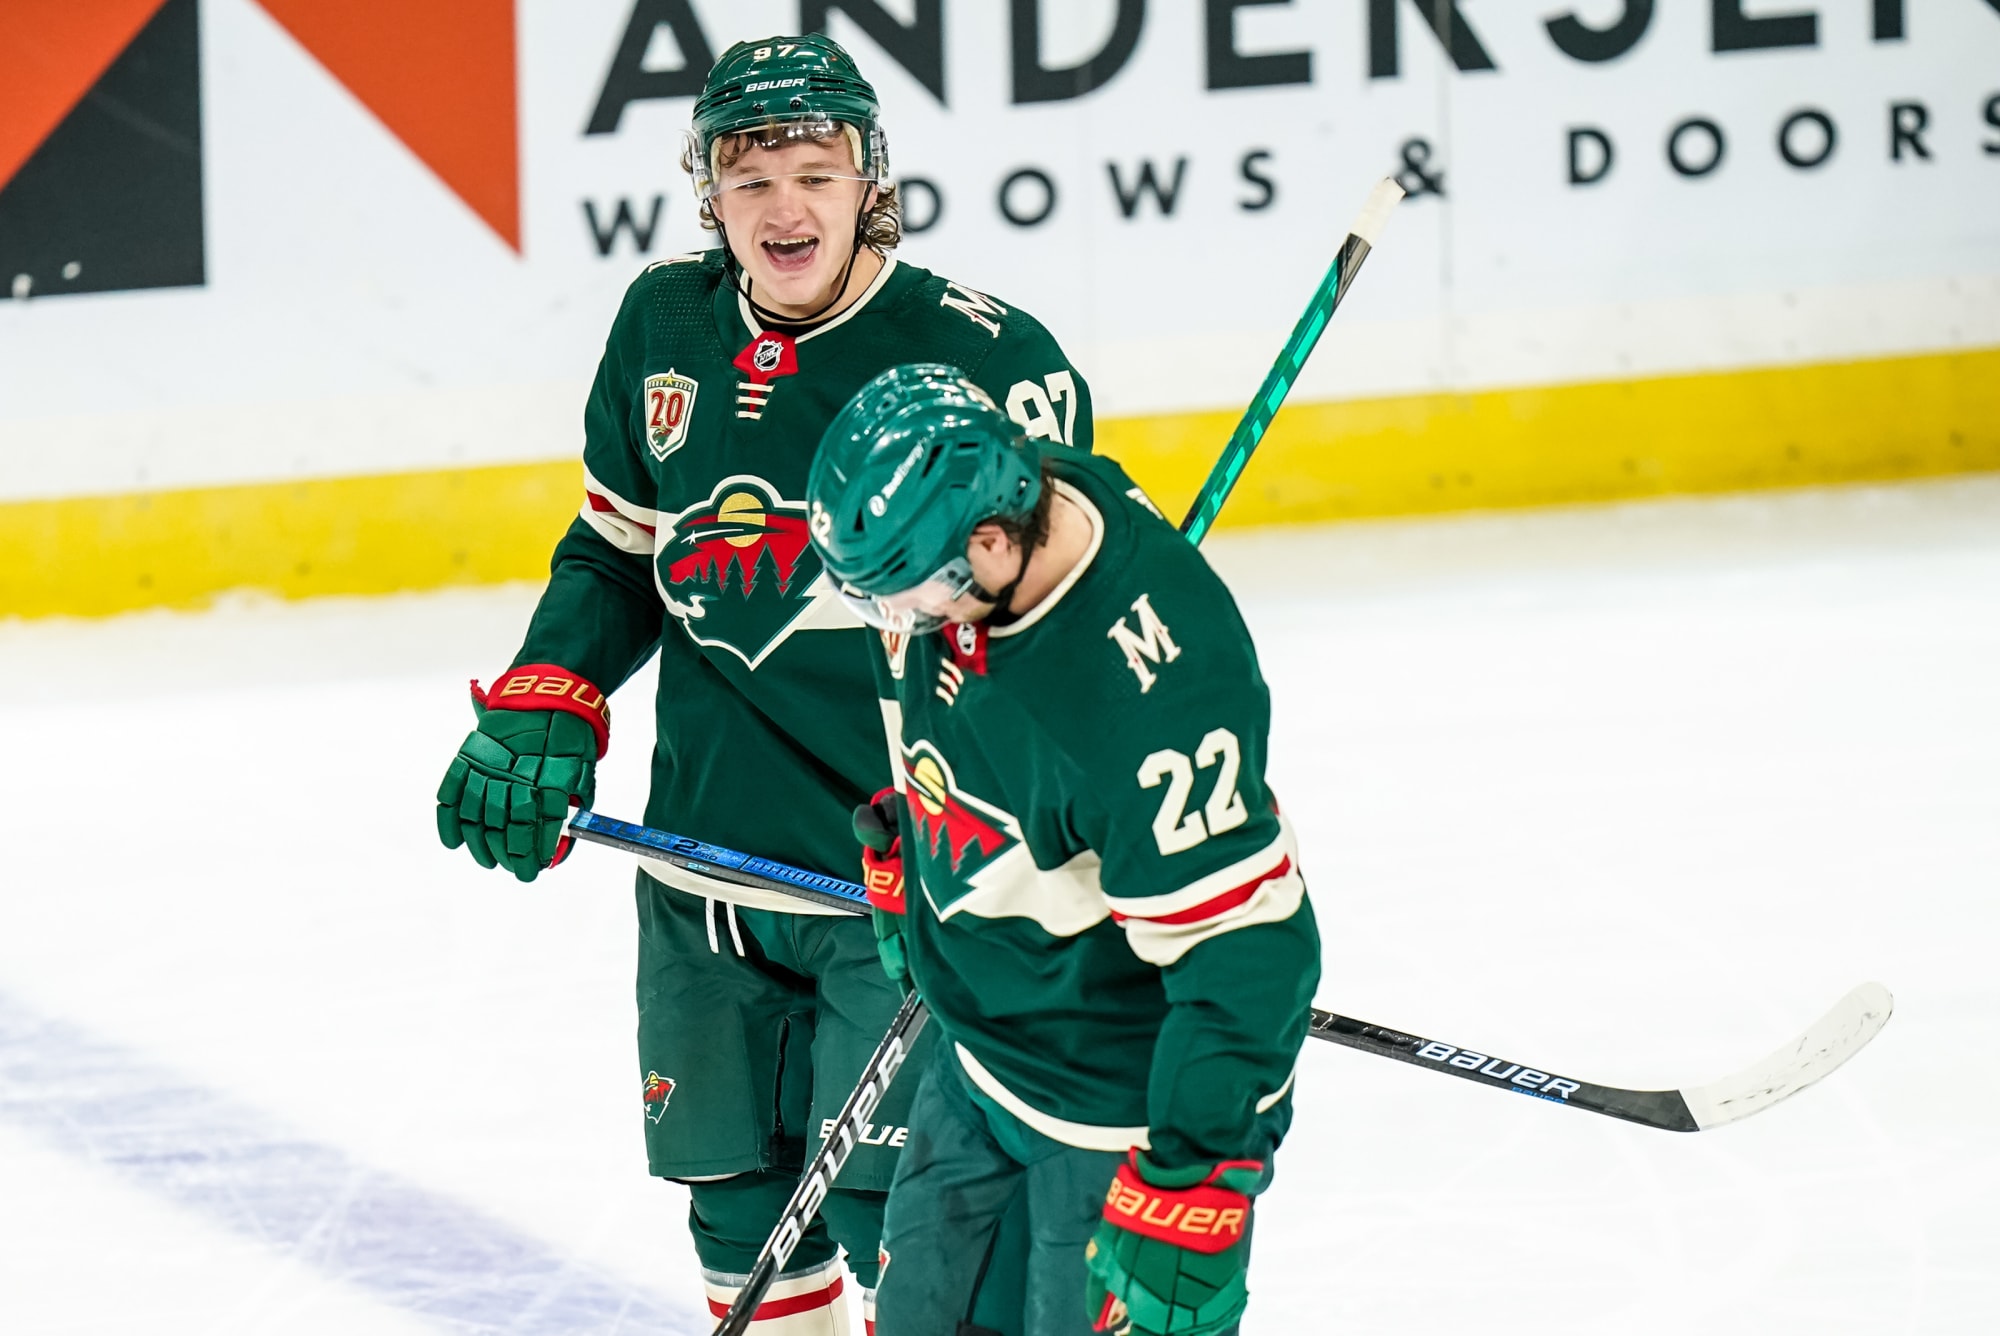 Mn Wild Playoff Schedule 2022 Minnesota Wild: How The 2021-22 Season Could Play Out